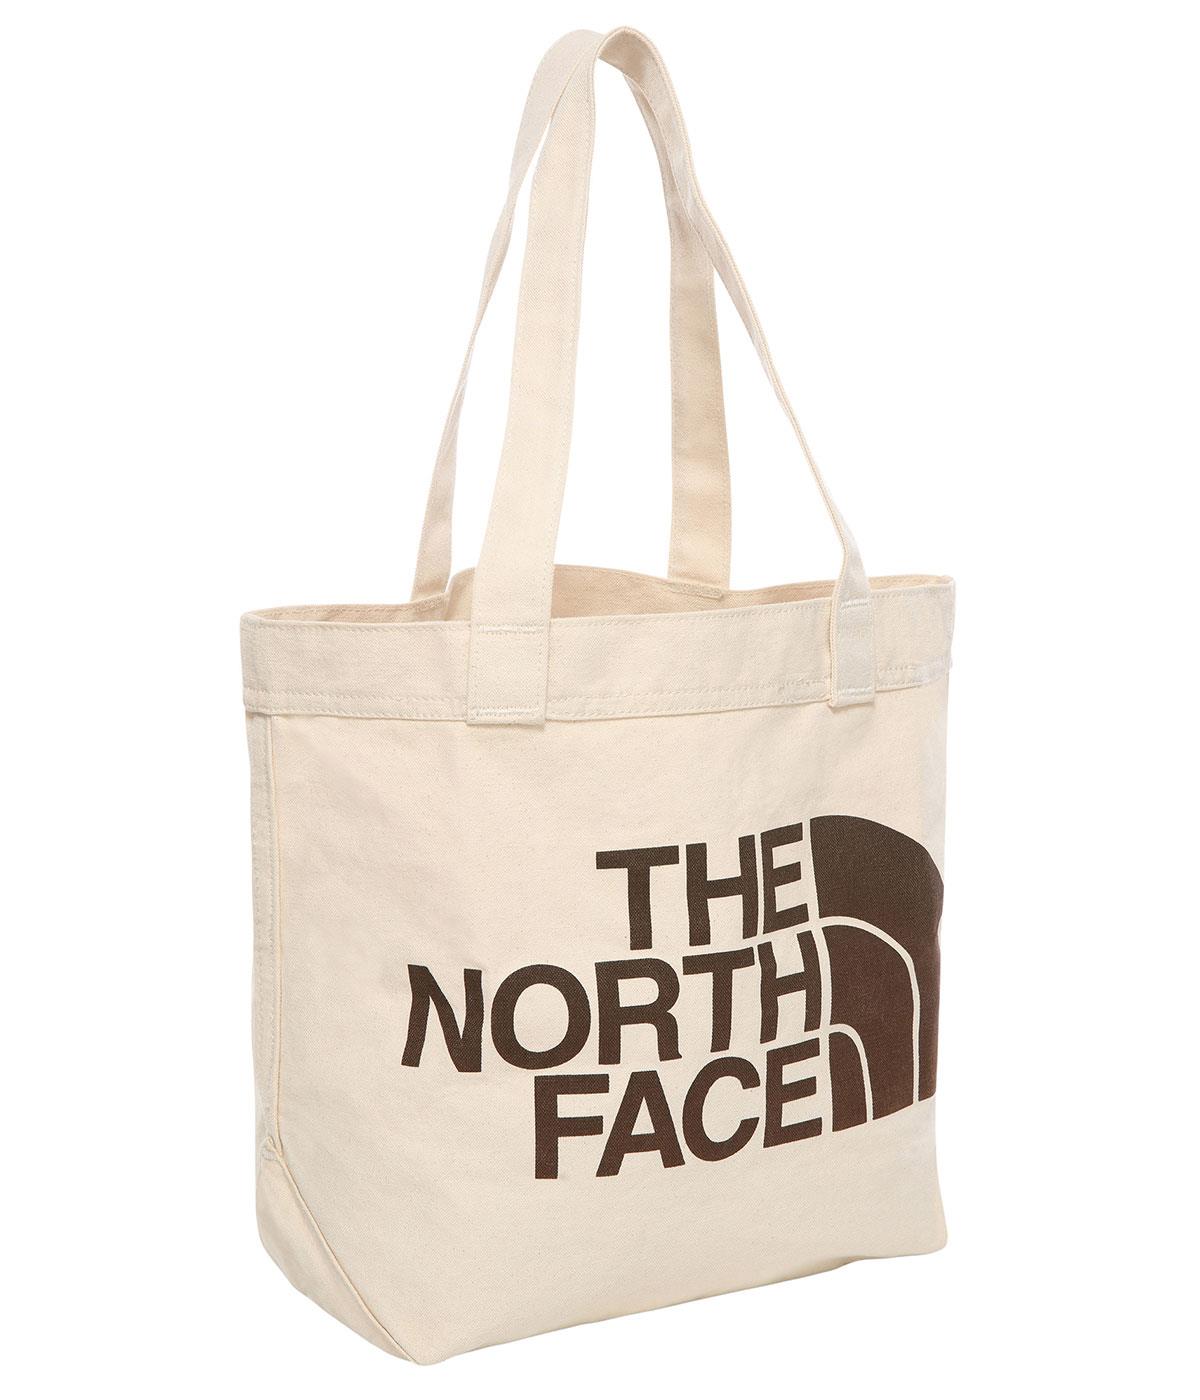 The Northface COTTON TOTE NF0A3VWQR171